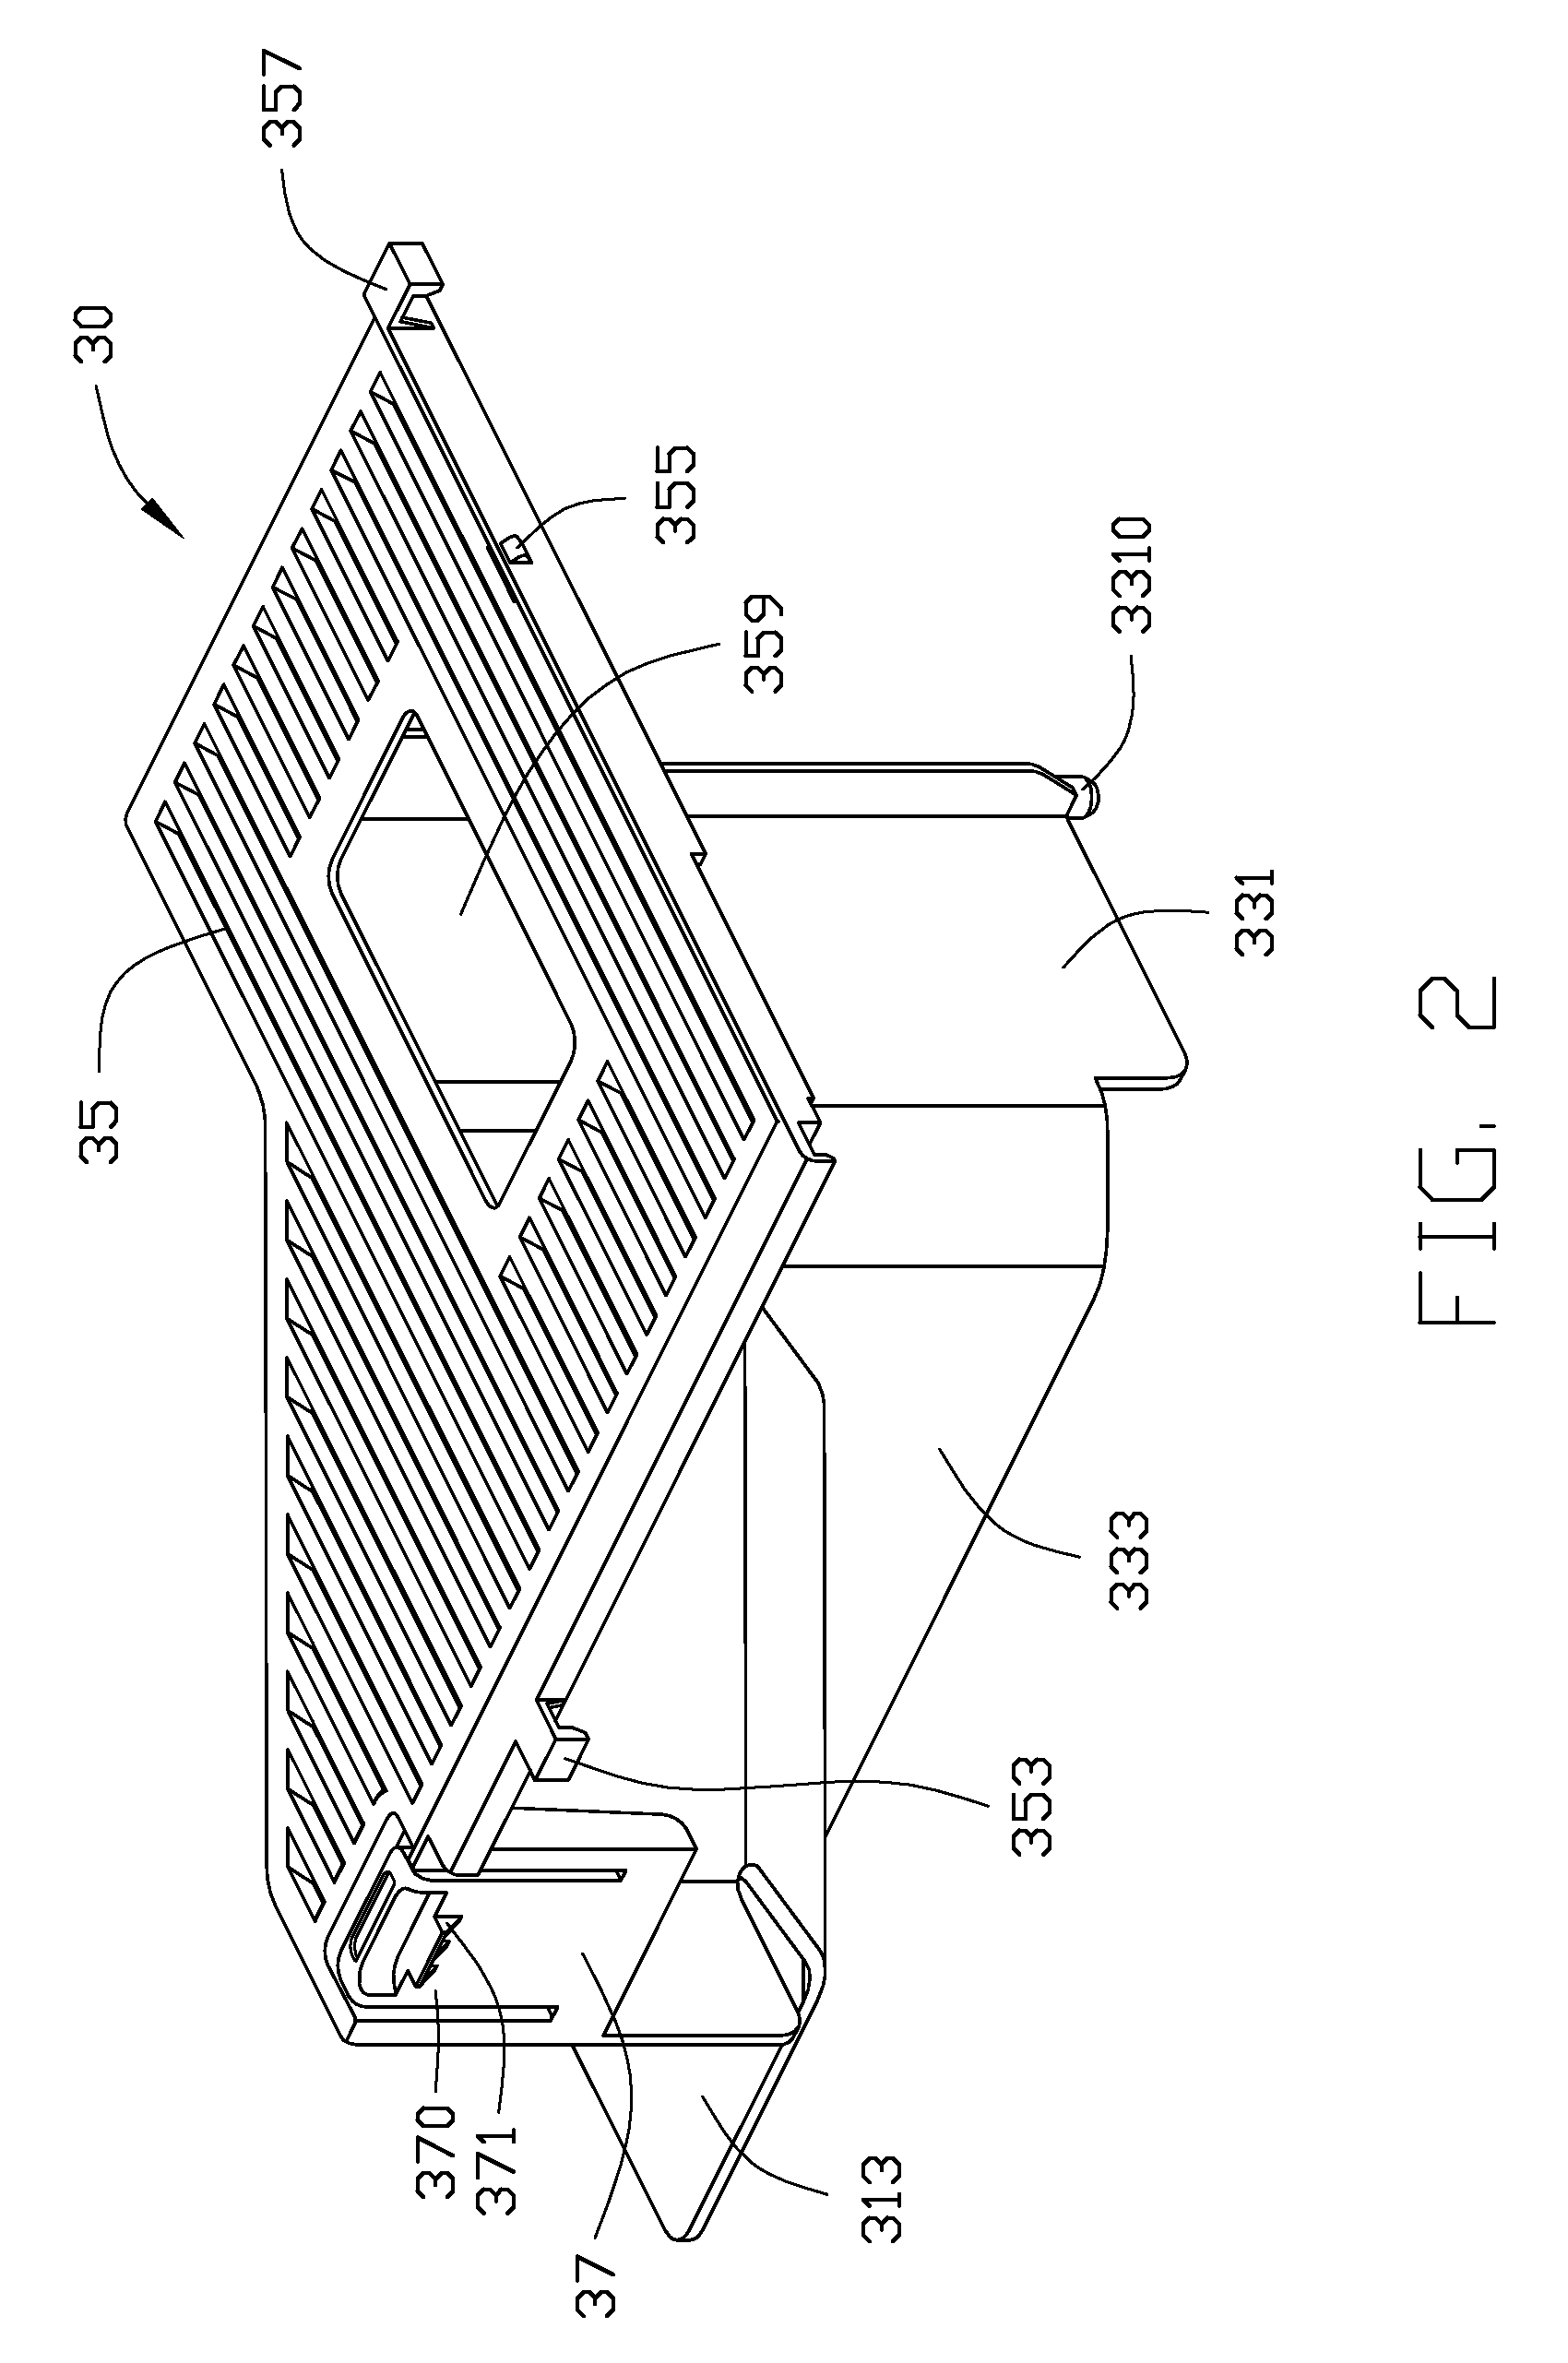 Computer system with airflow guiding duct